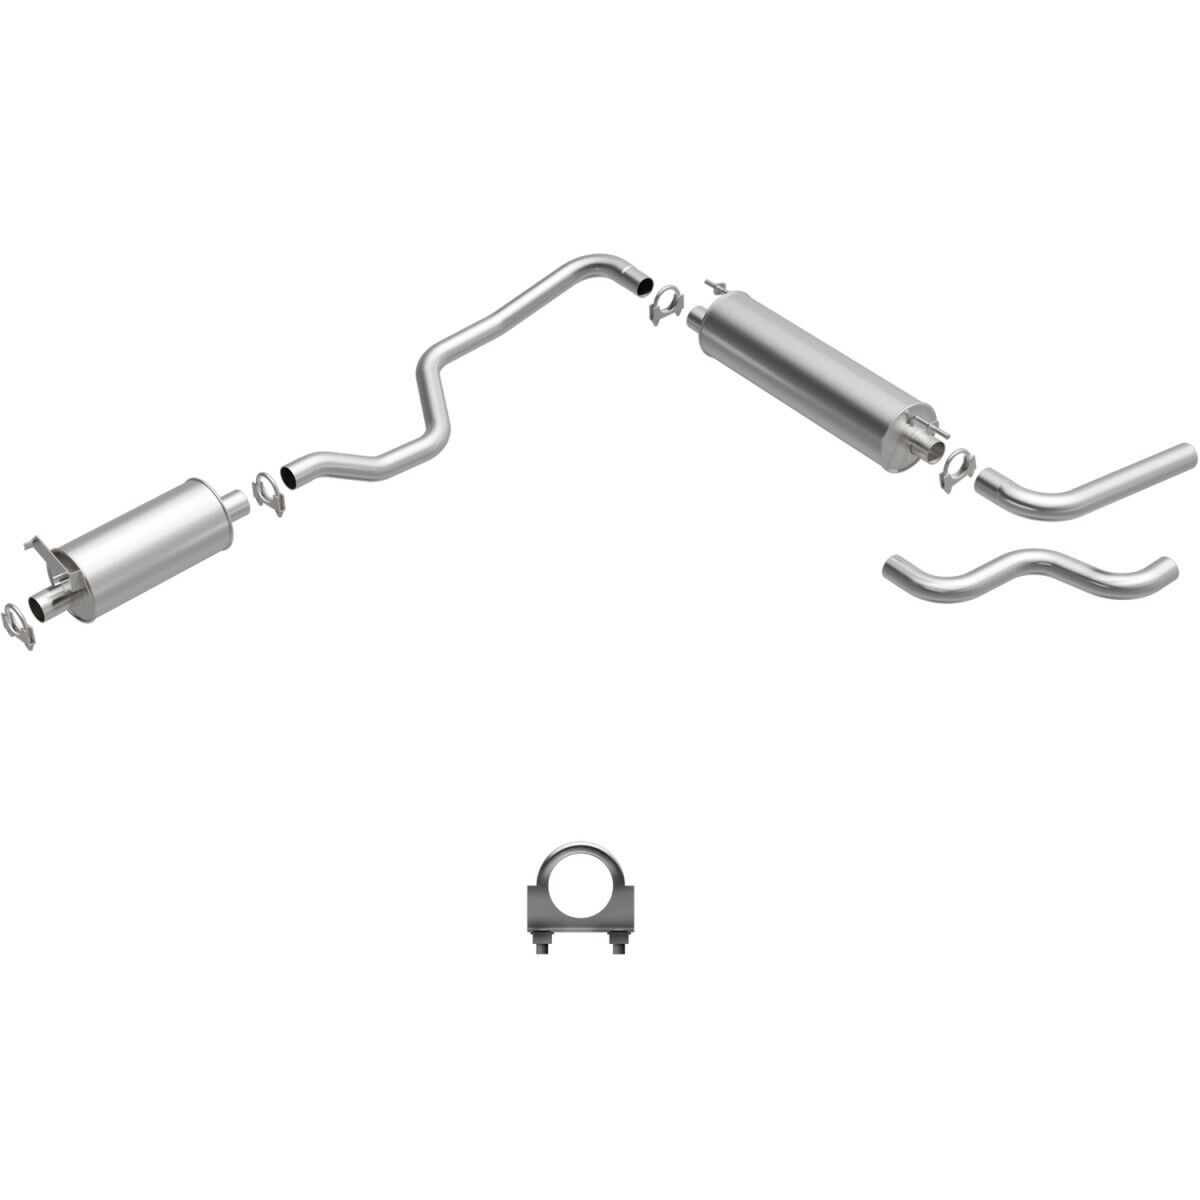 106-0631 BRExhaust Exhaust System for Volvo 240 244 245 1985-1989